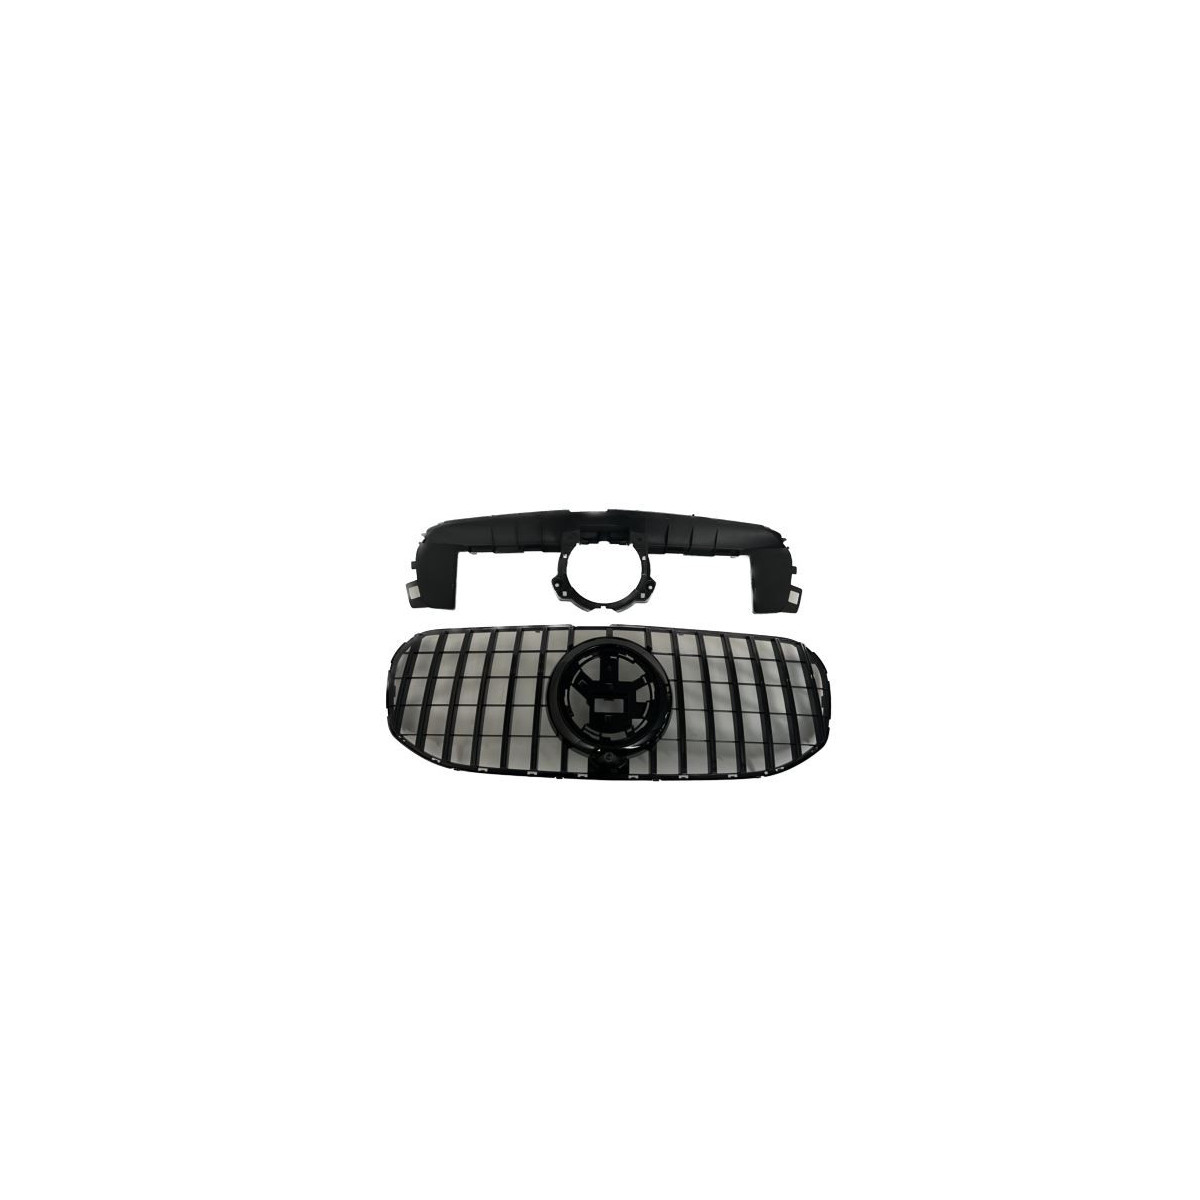 GRILL MERCEDES X167 19- GT STYLE BLACK ALSO CAMERA